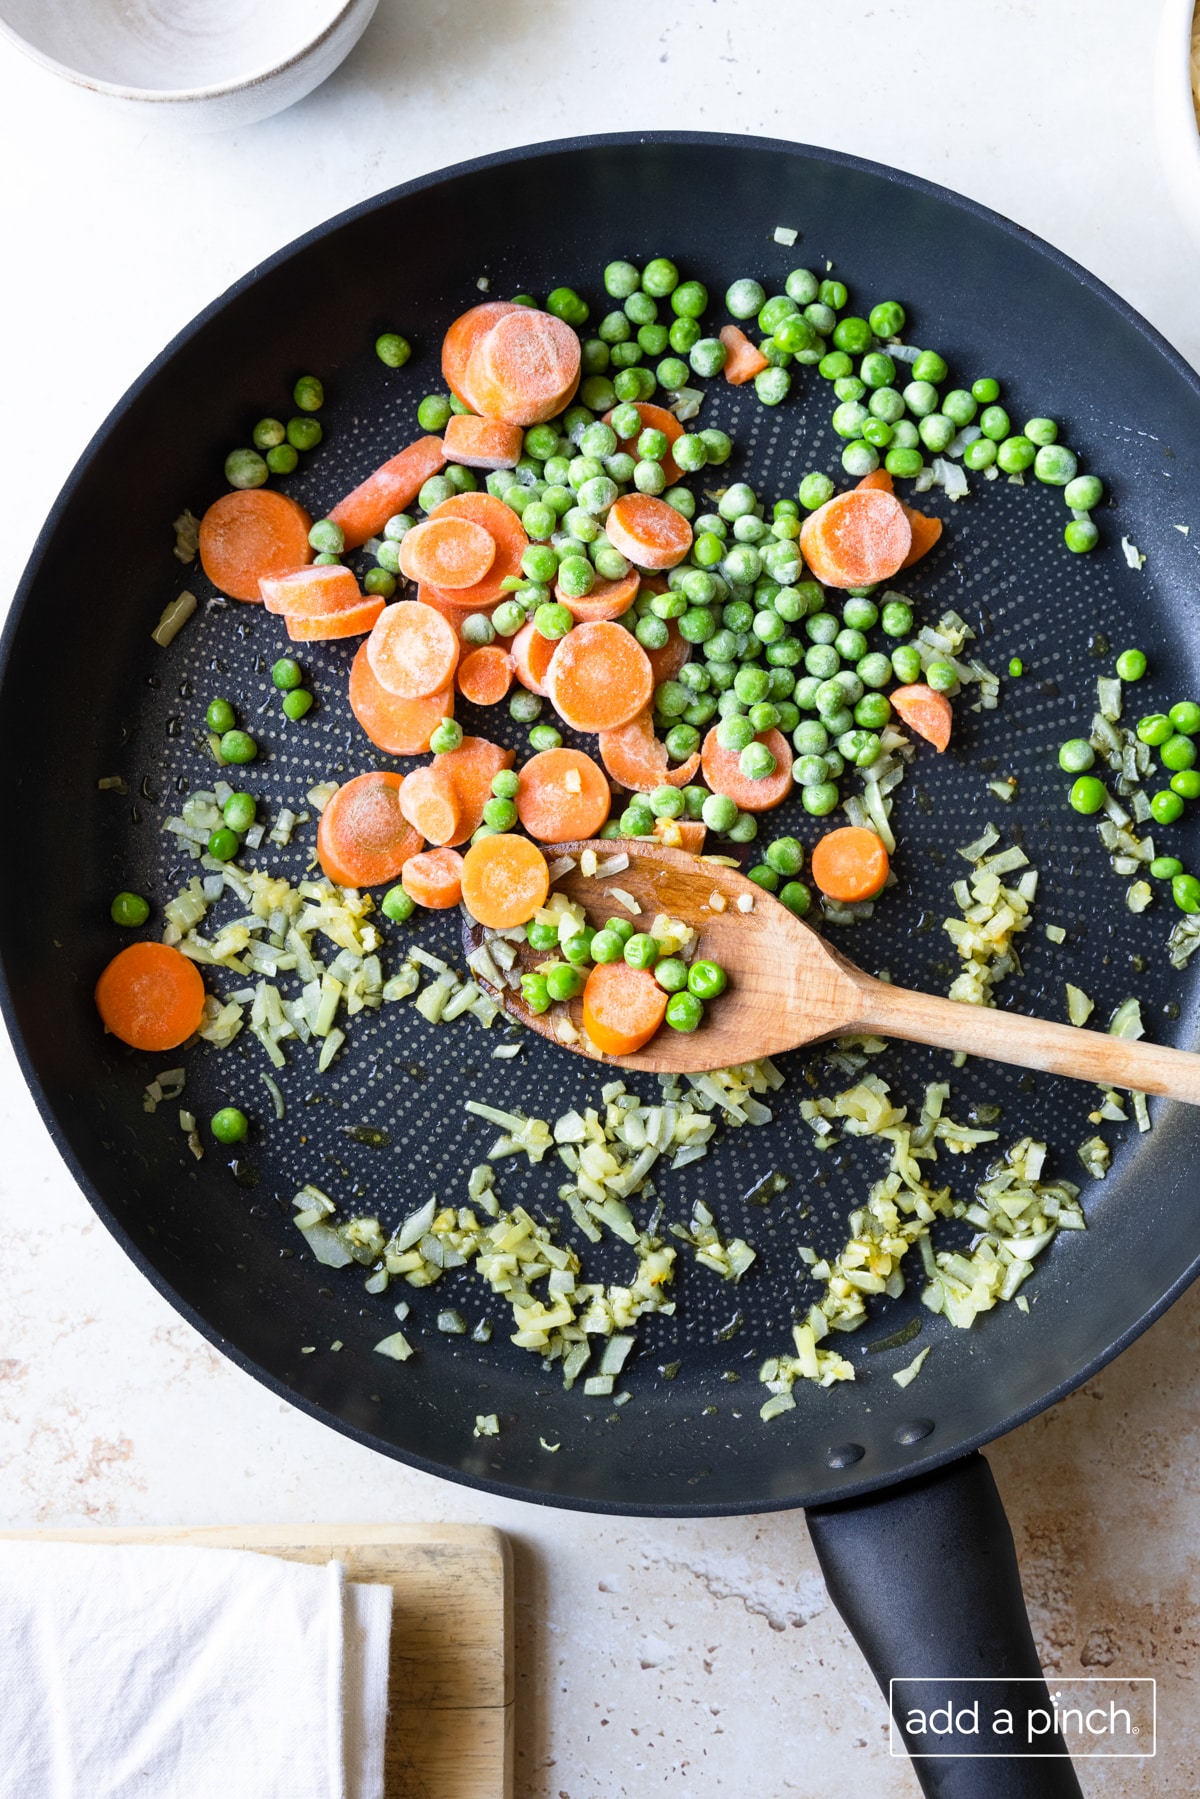 Photo of cooking garlic, onions, peas, and carrots in a skillet with a wooden spoon.